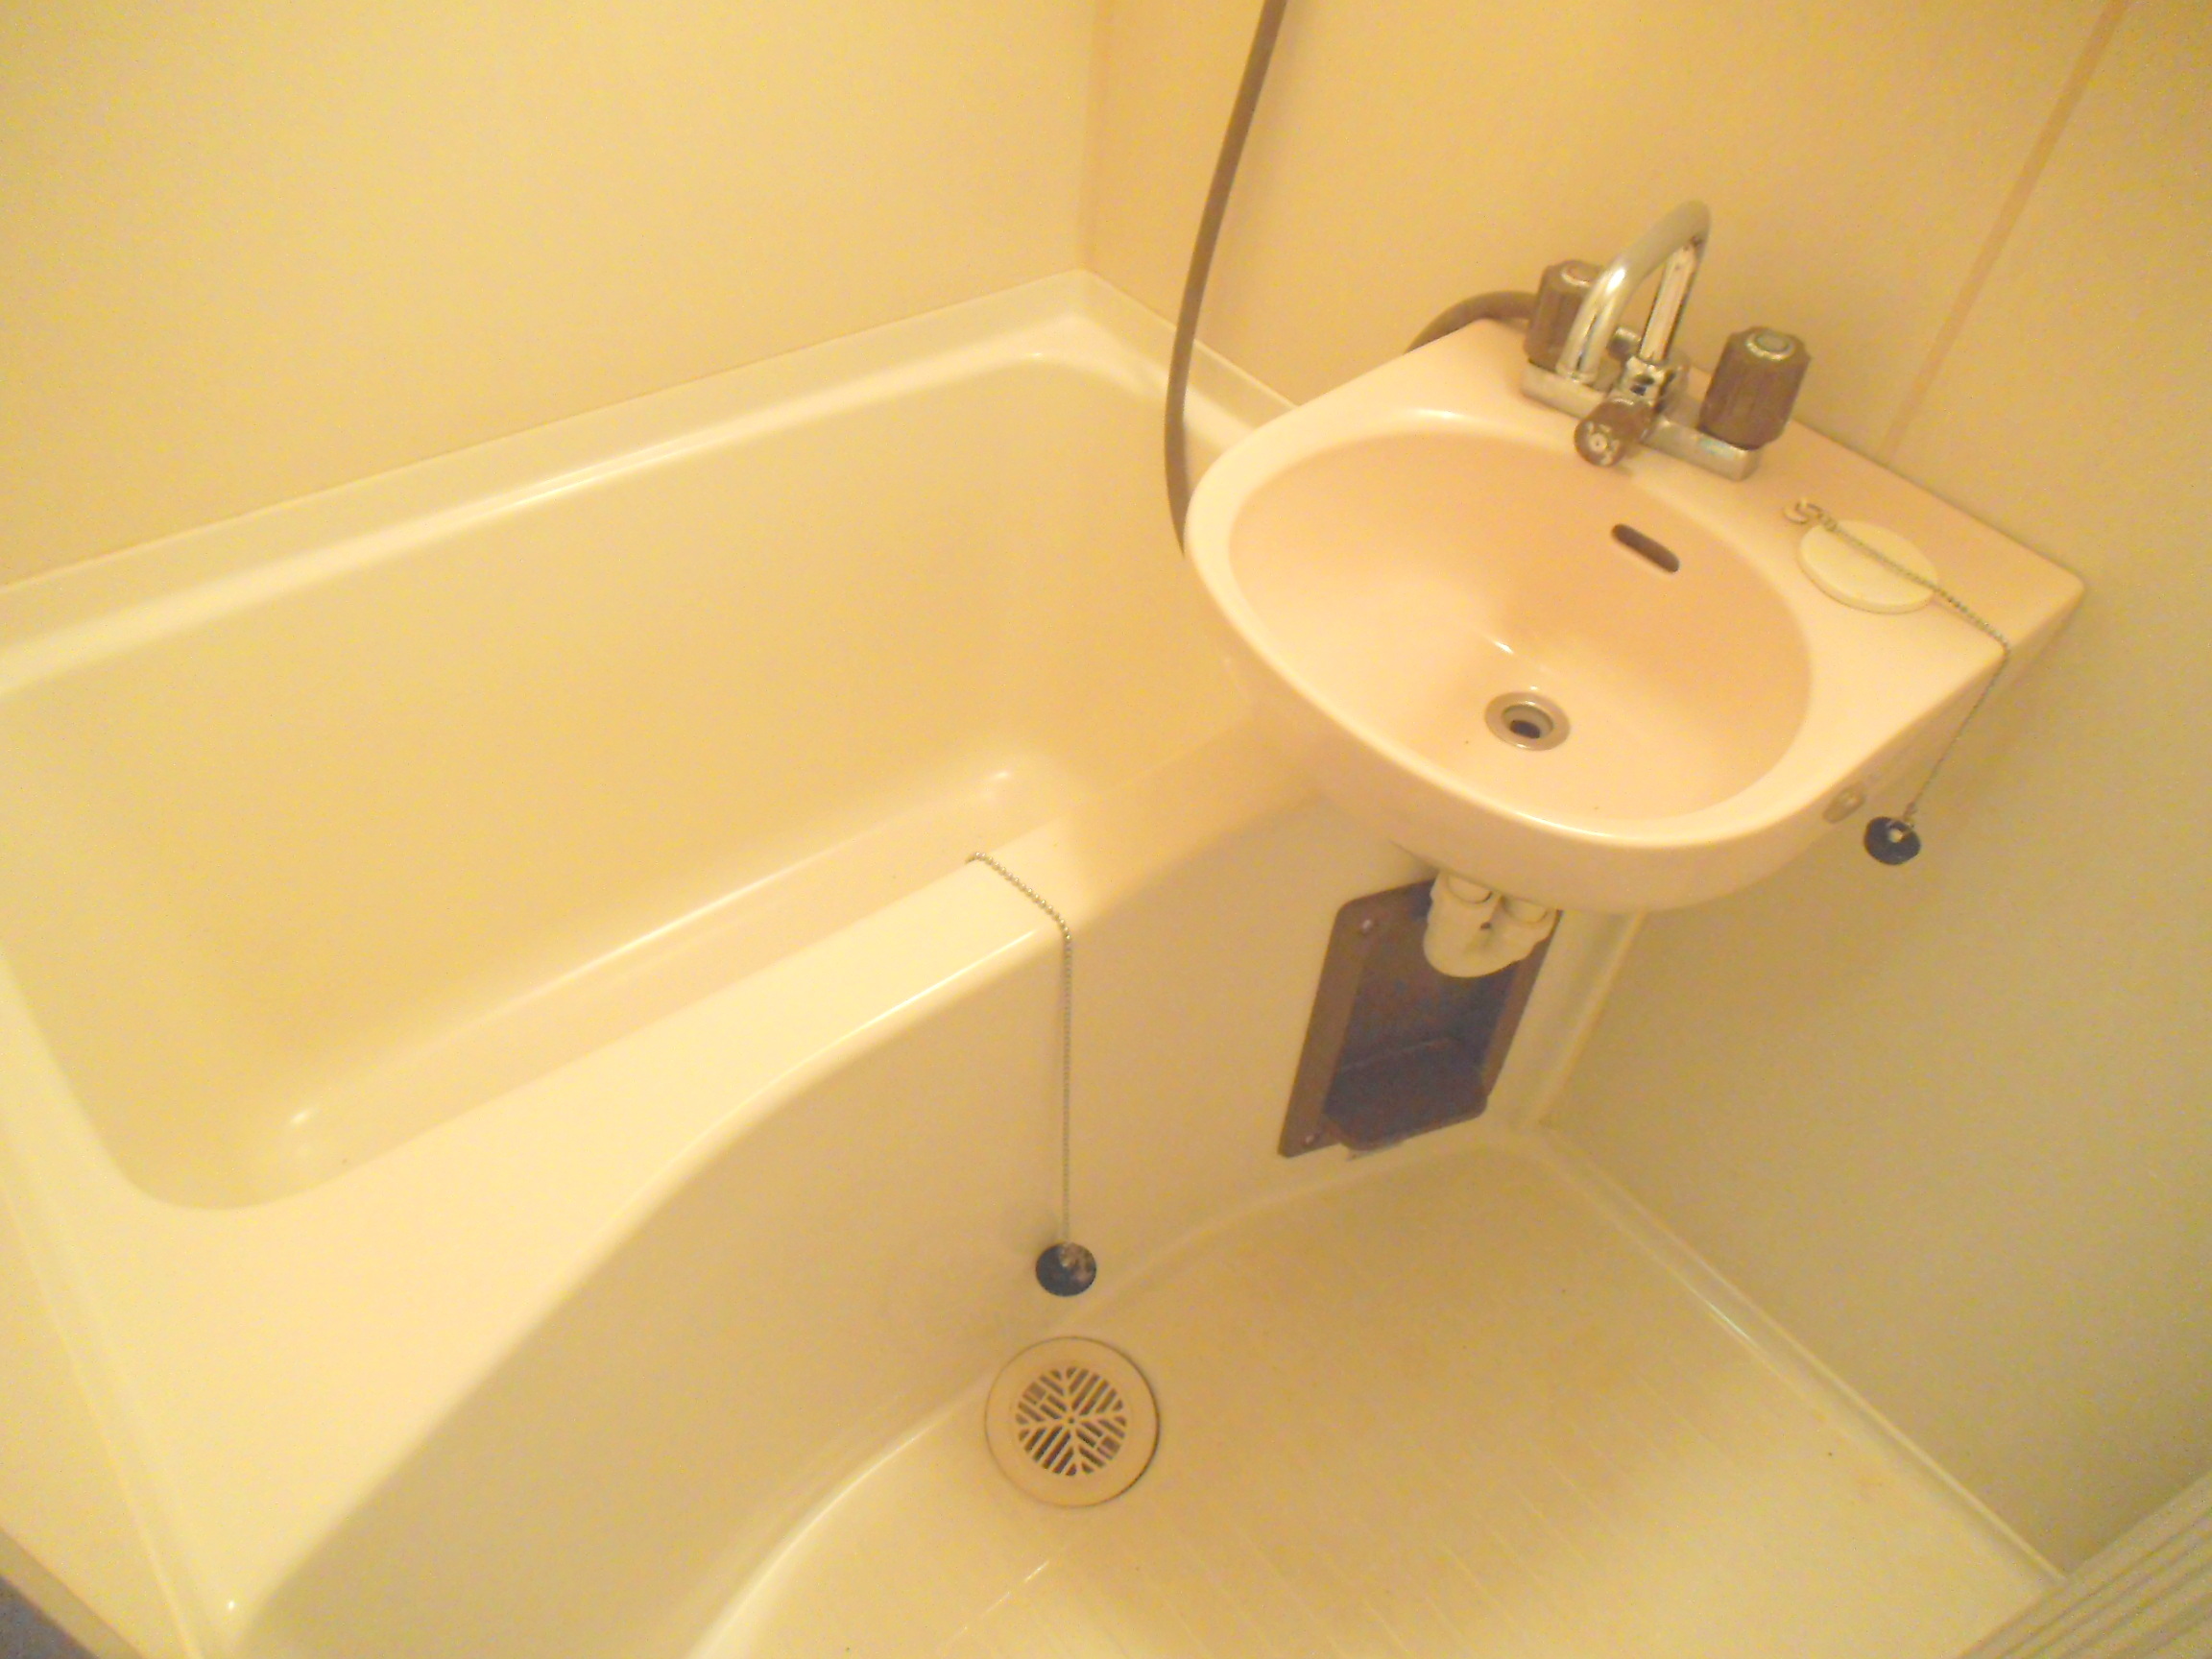 Bath. Of course bath toilet by this rent is a must-see! !